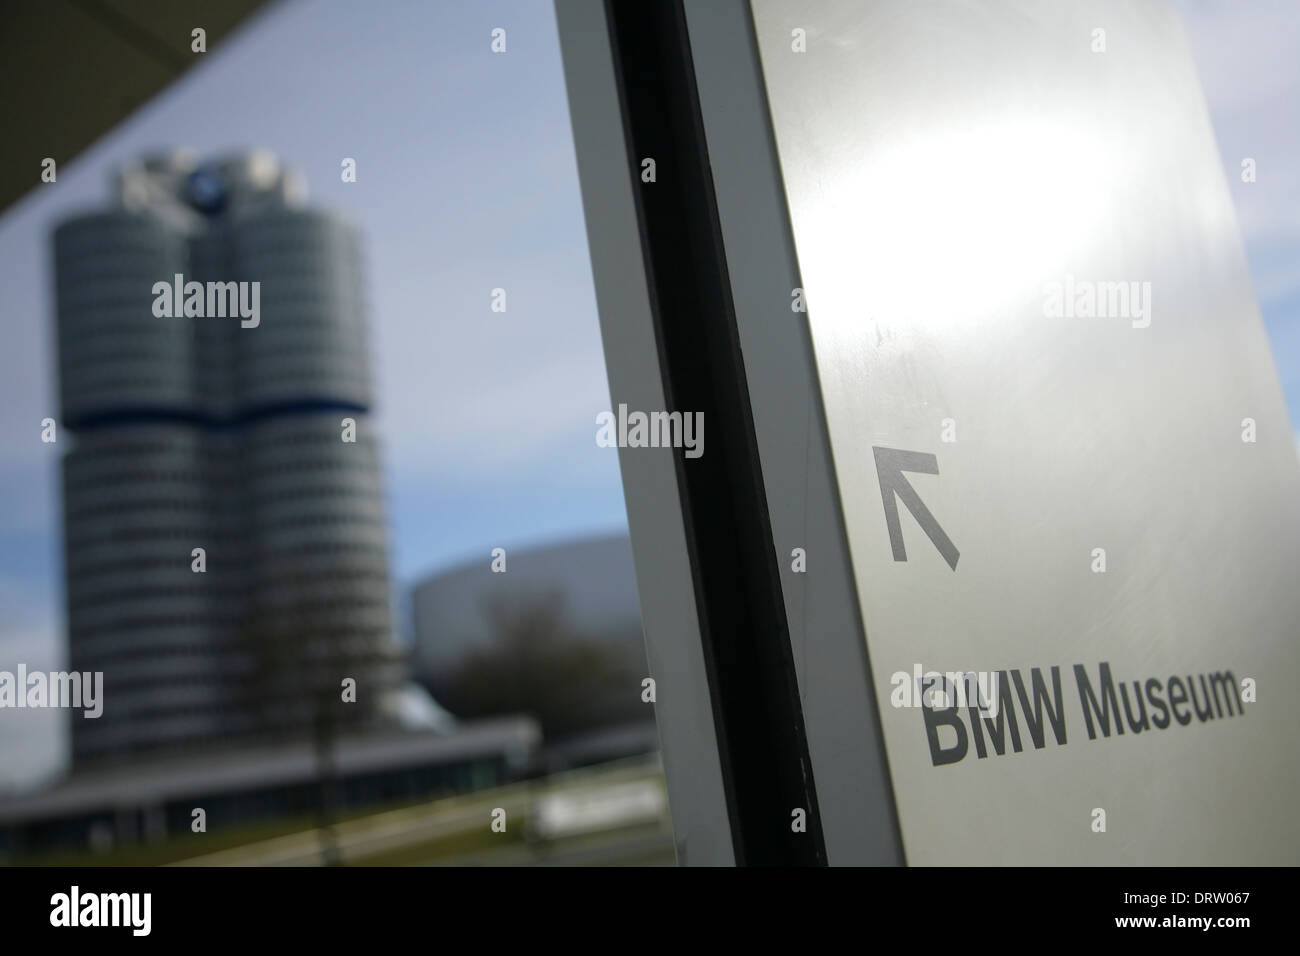 The BMW Headquarters and Museum, Munich, Germany. Stock Photo